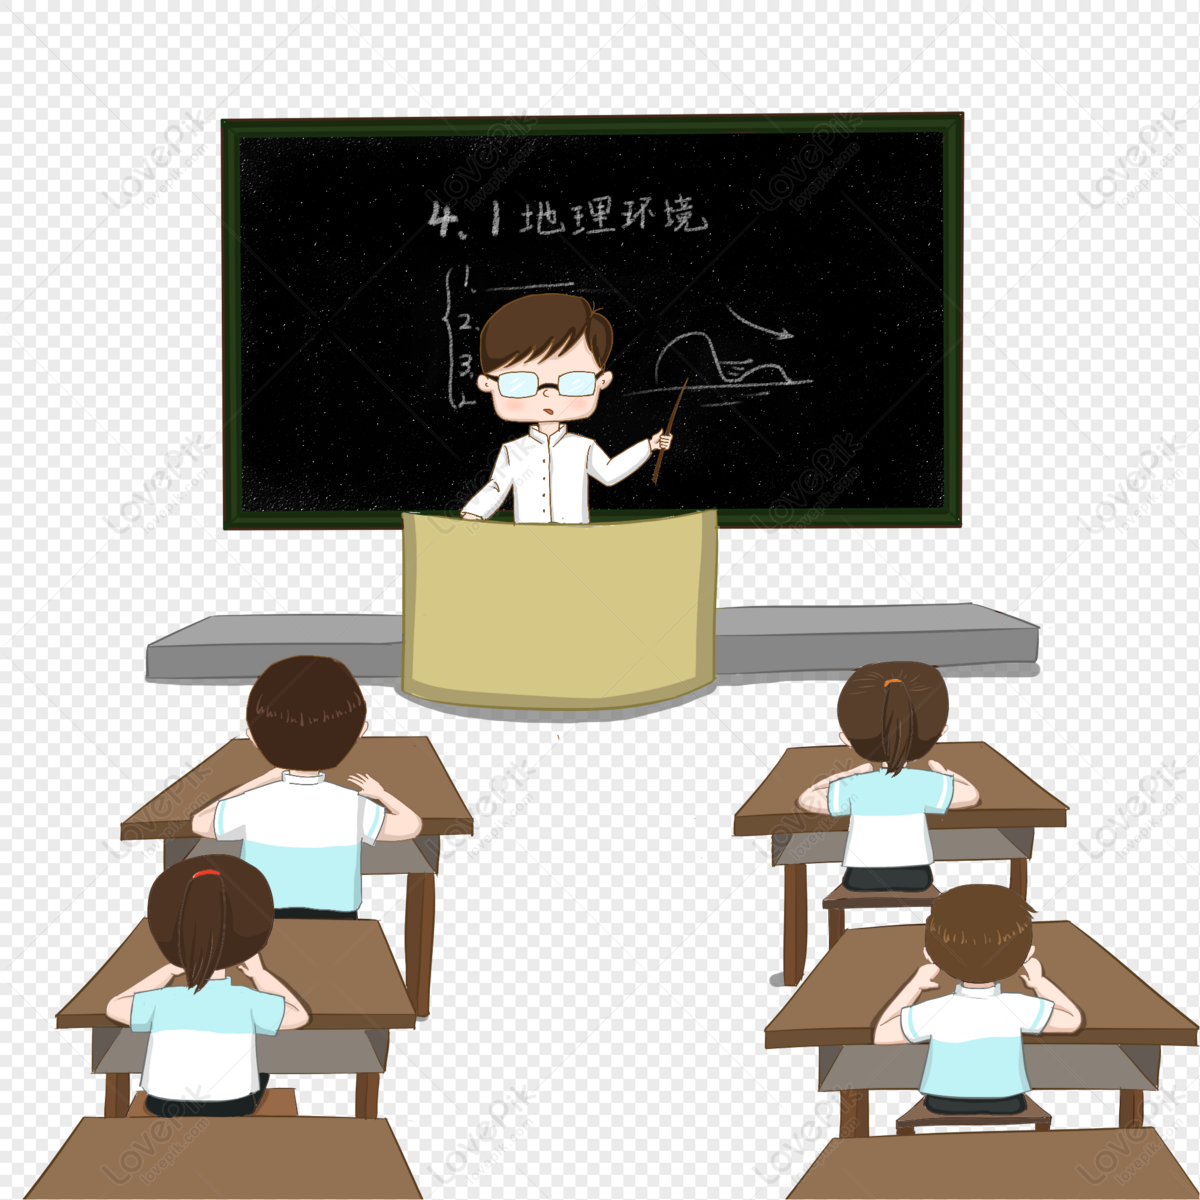 demonstration in classroom clipart images